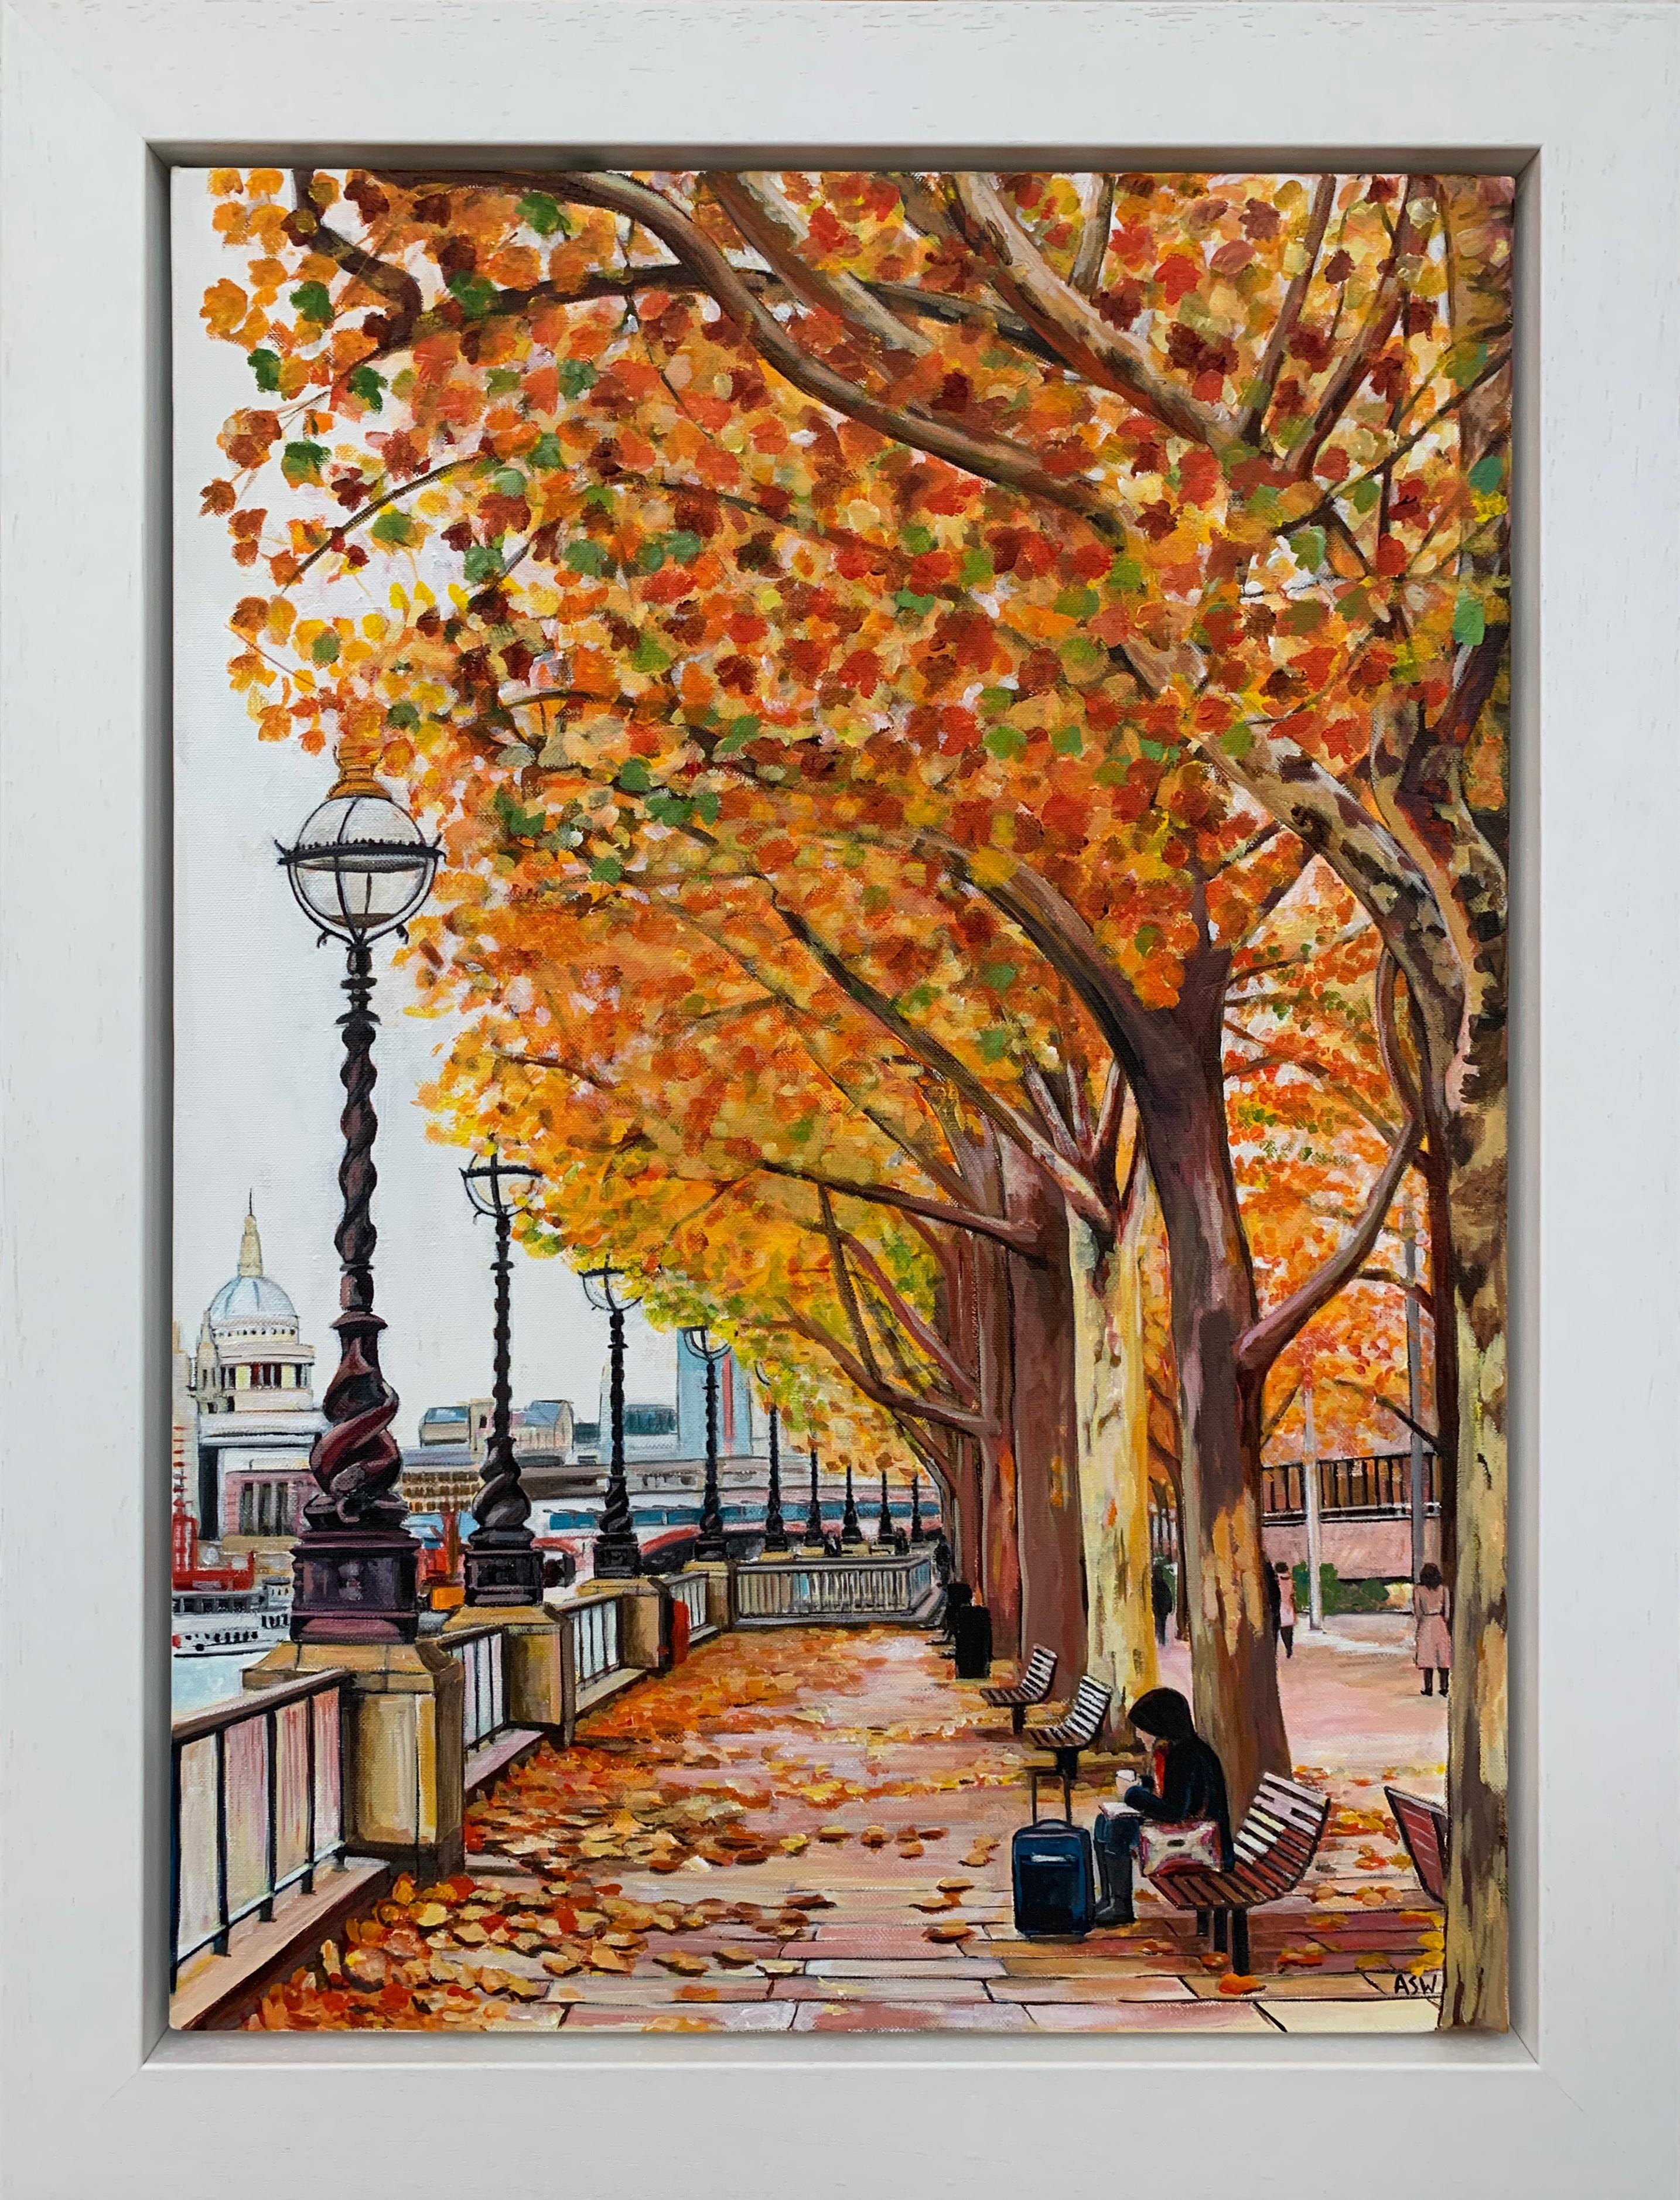 Angela Wakefield Landscape Painting - Painting of Victoria Embankment London in Autumn by Collectible British Artist